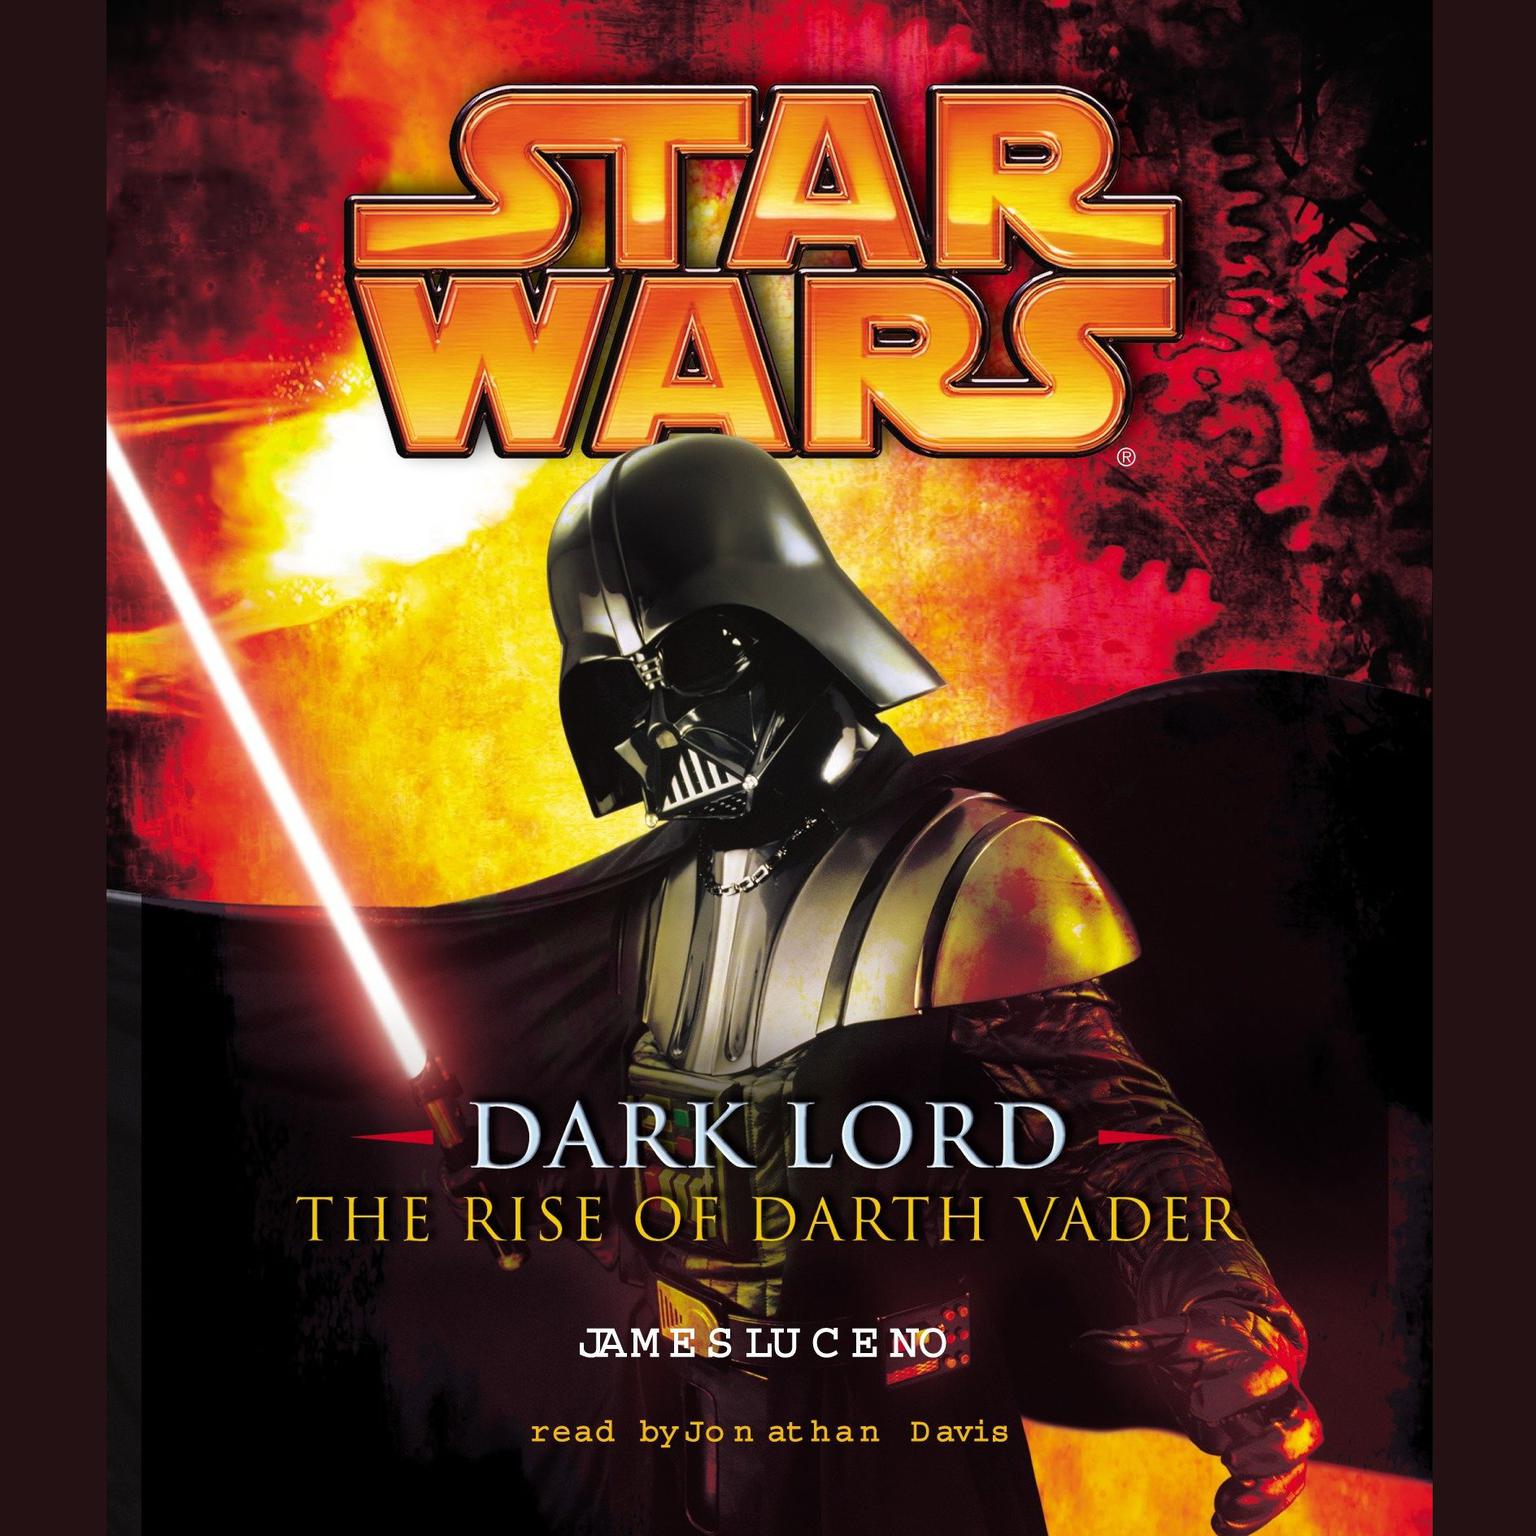 Star Wars: Dark Lord (Abridged): The Rise of Darth Vader Audiobook, by James Luceno